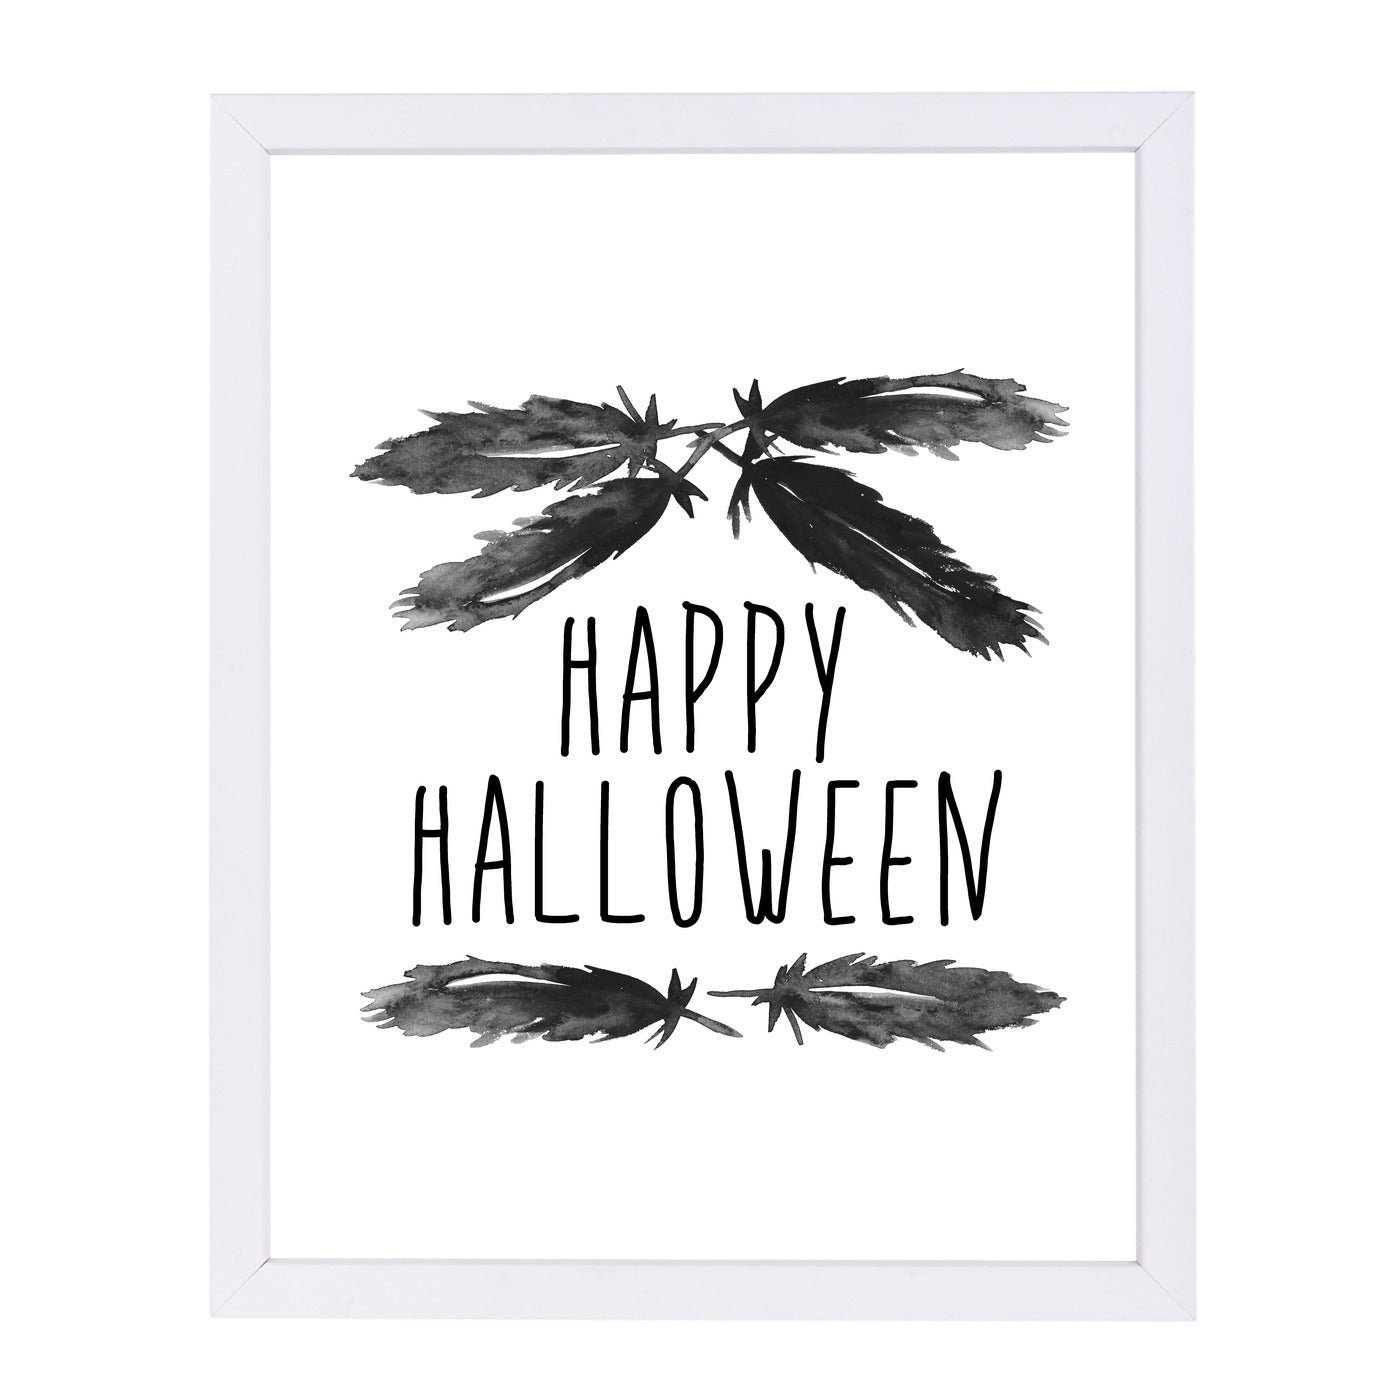 Happy Halloween Feather Art by Jetty Printables Framed Print - Americanflat